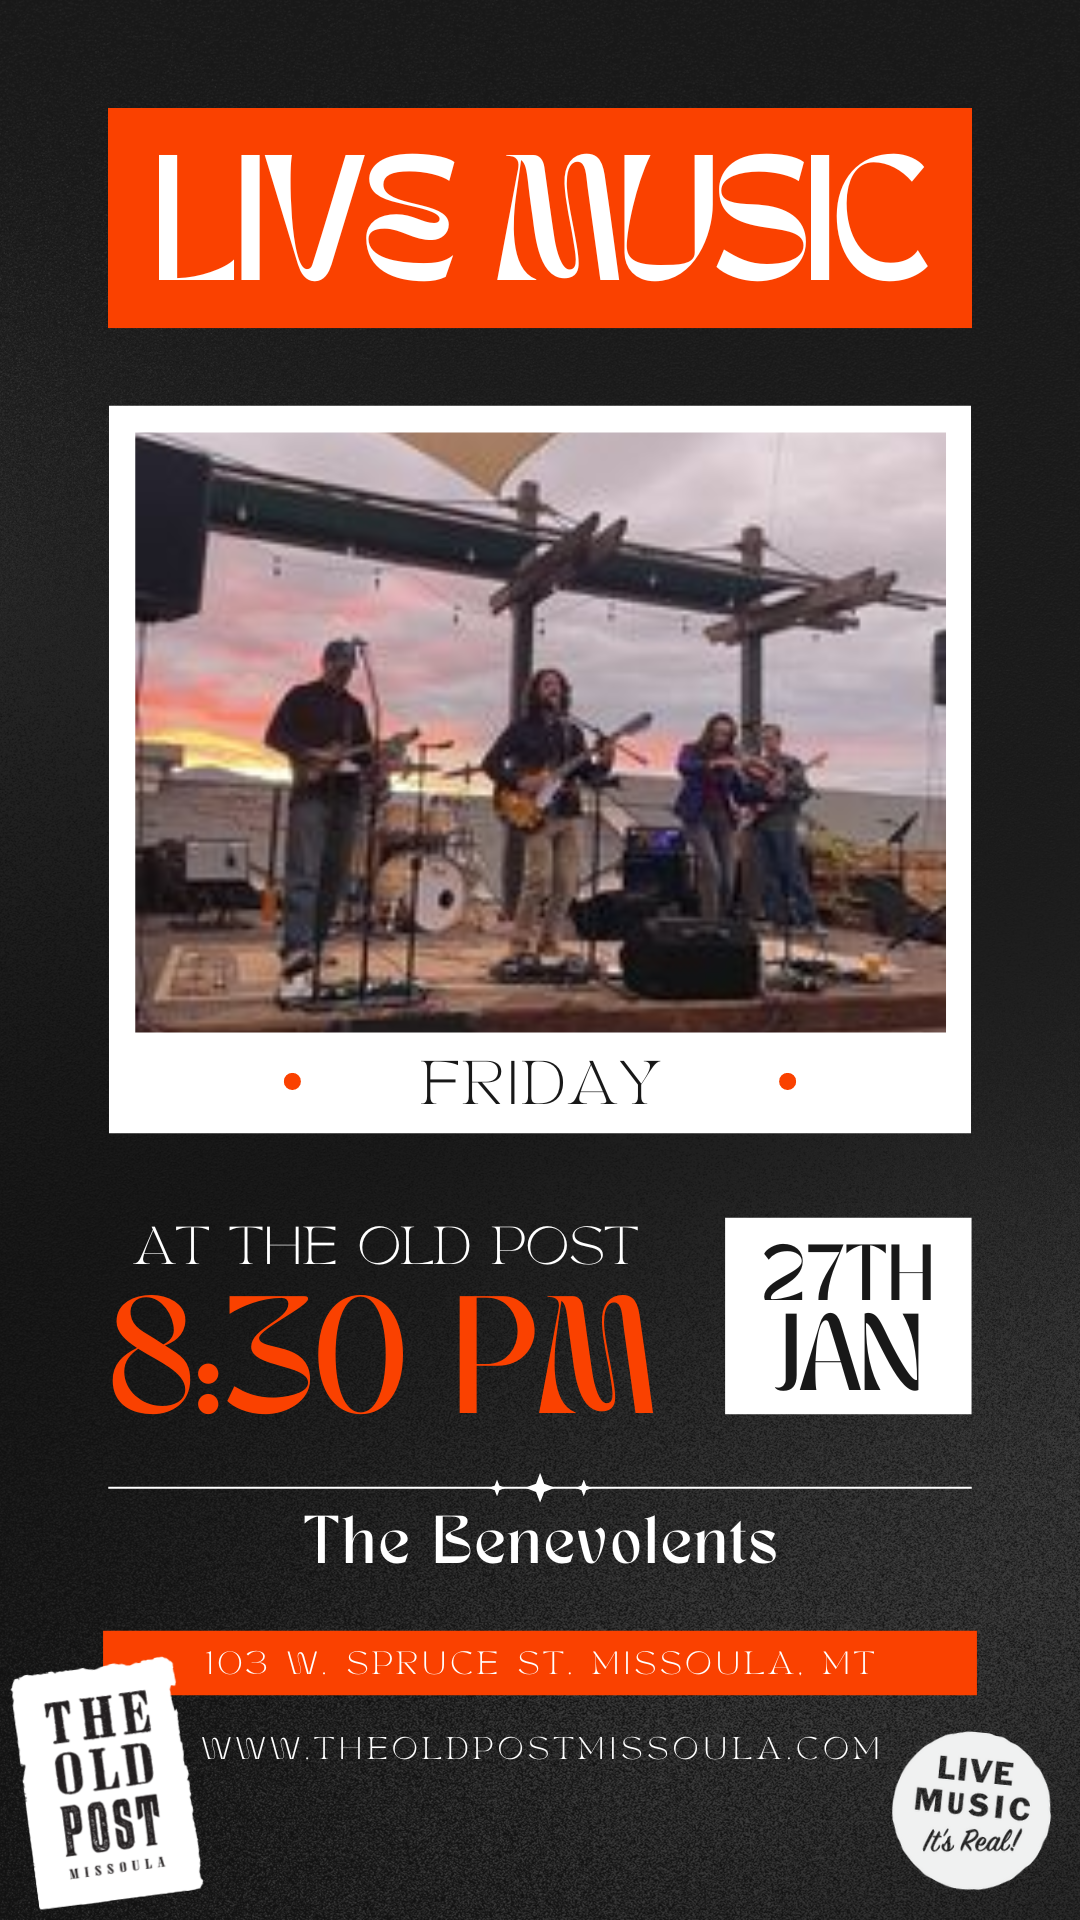 The Benevolents live at The Old Post on Friday, February 27 from 8:00 pm to 10:00 pm